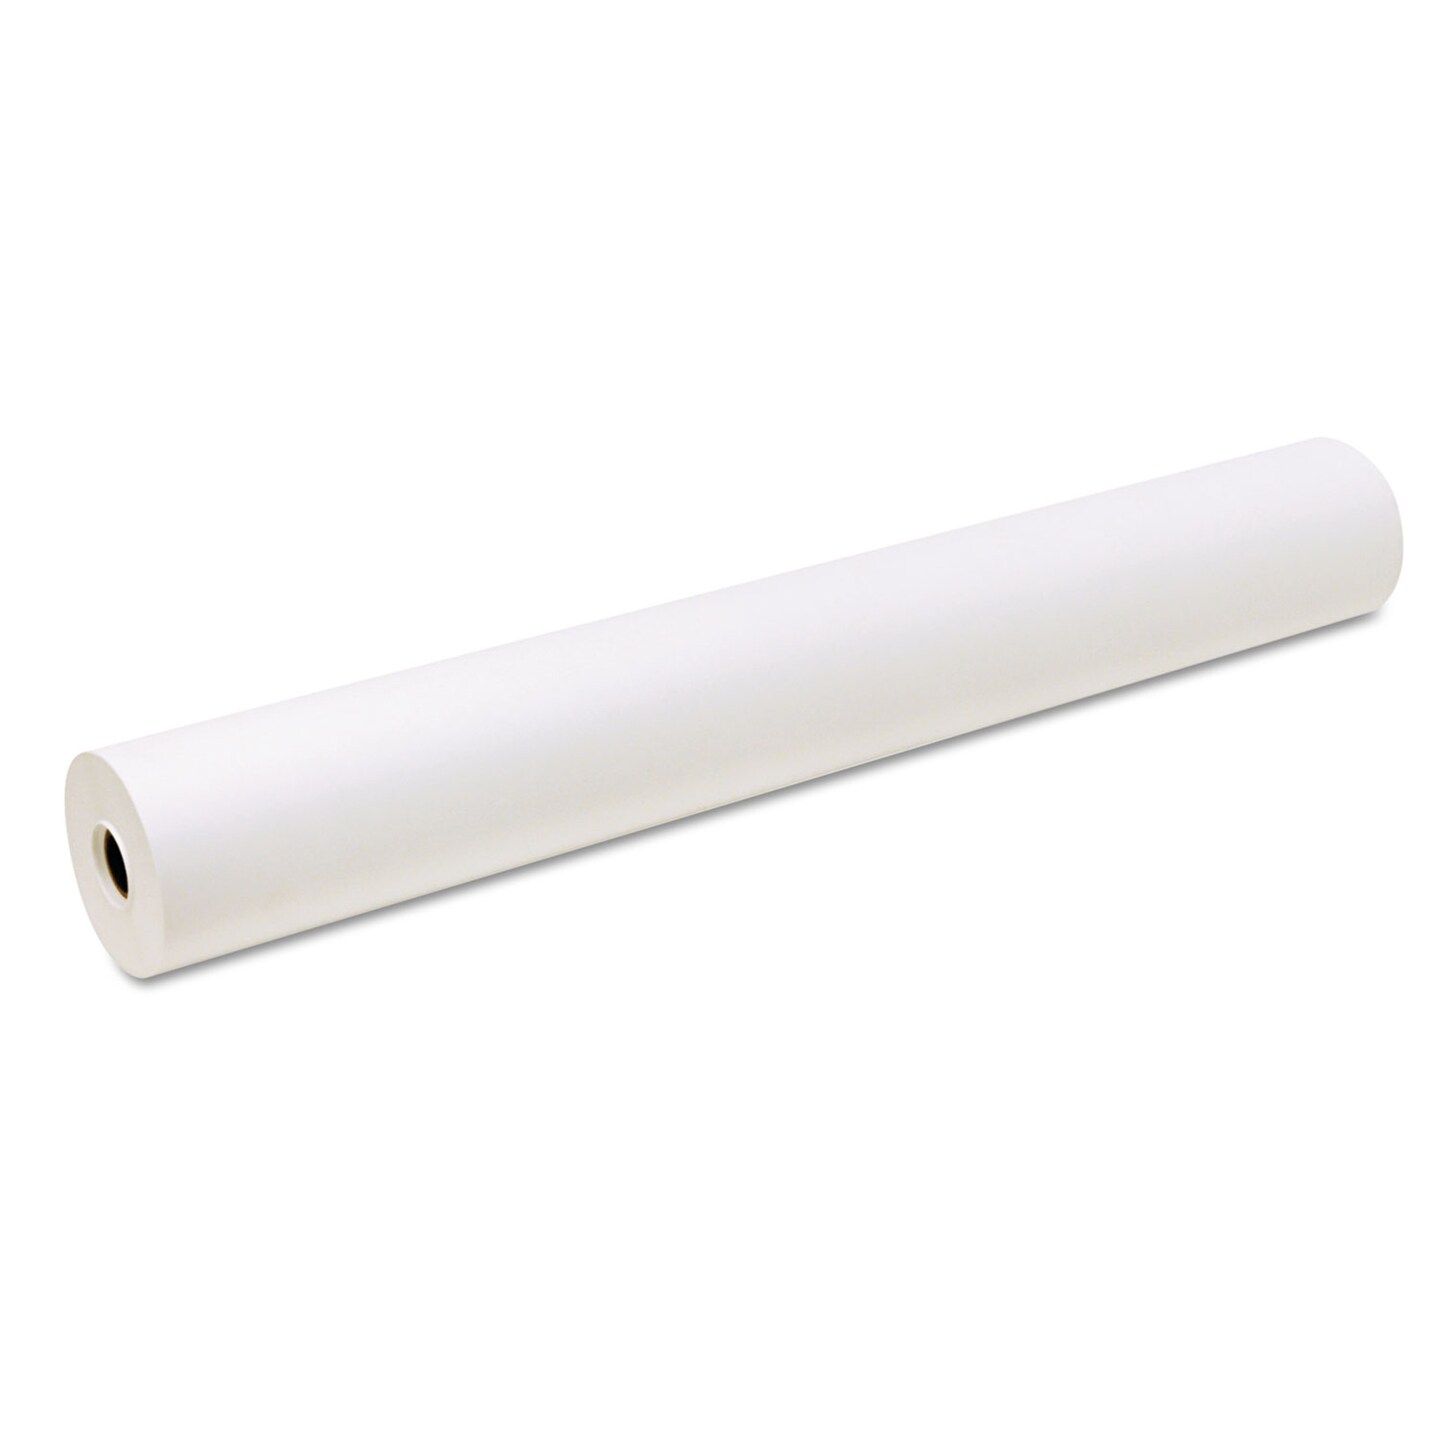 Pacon Easel Paper Roll